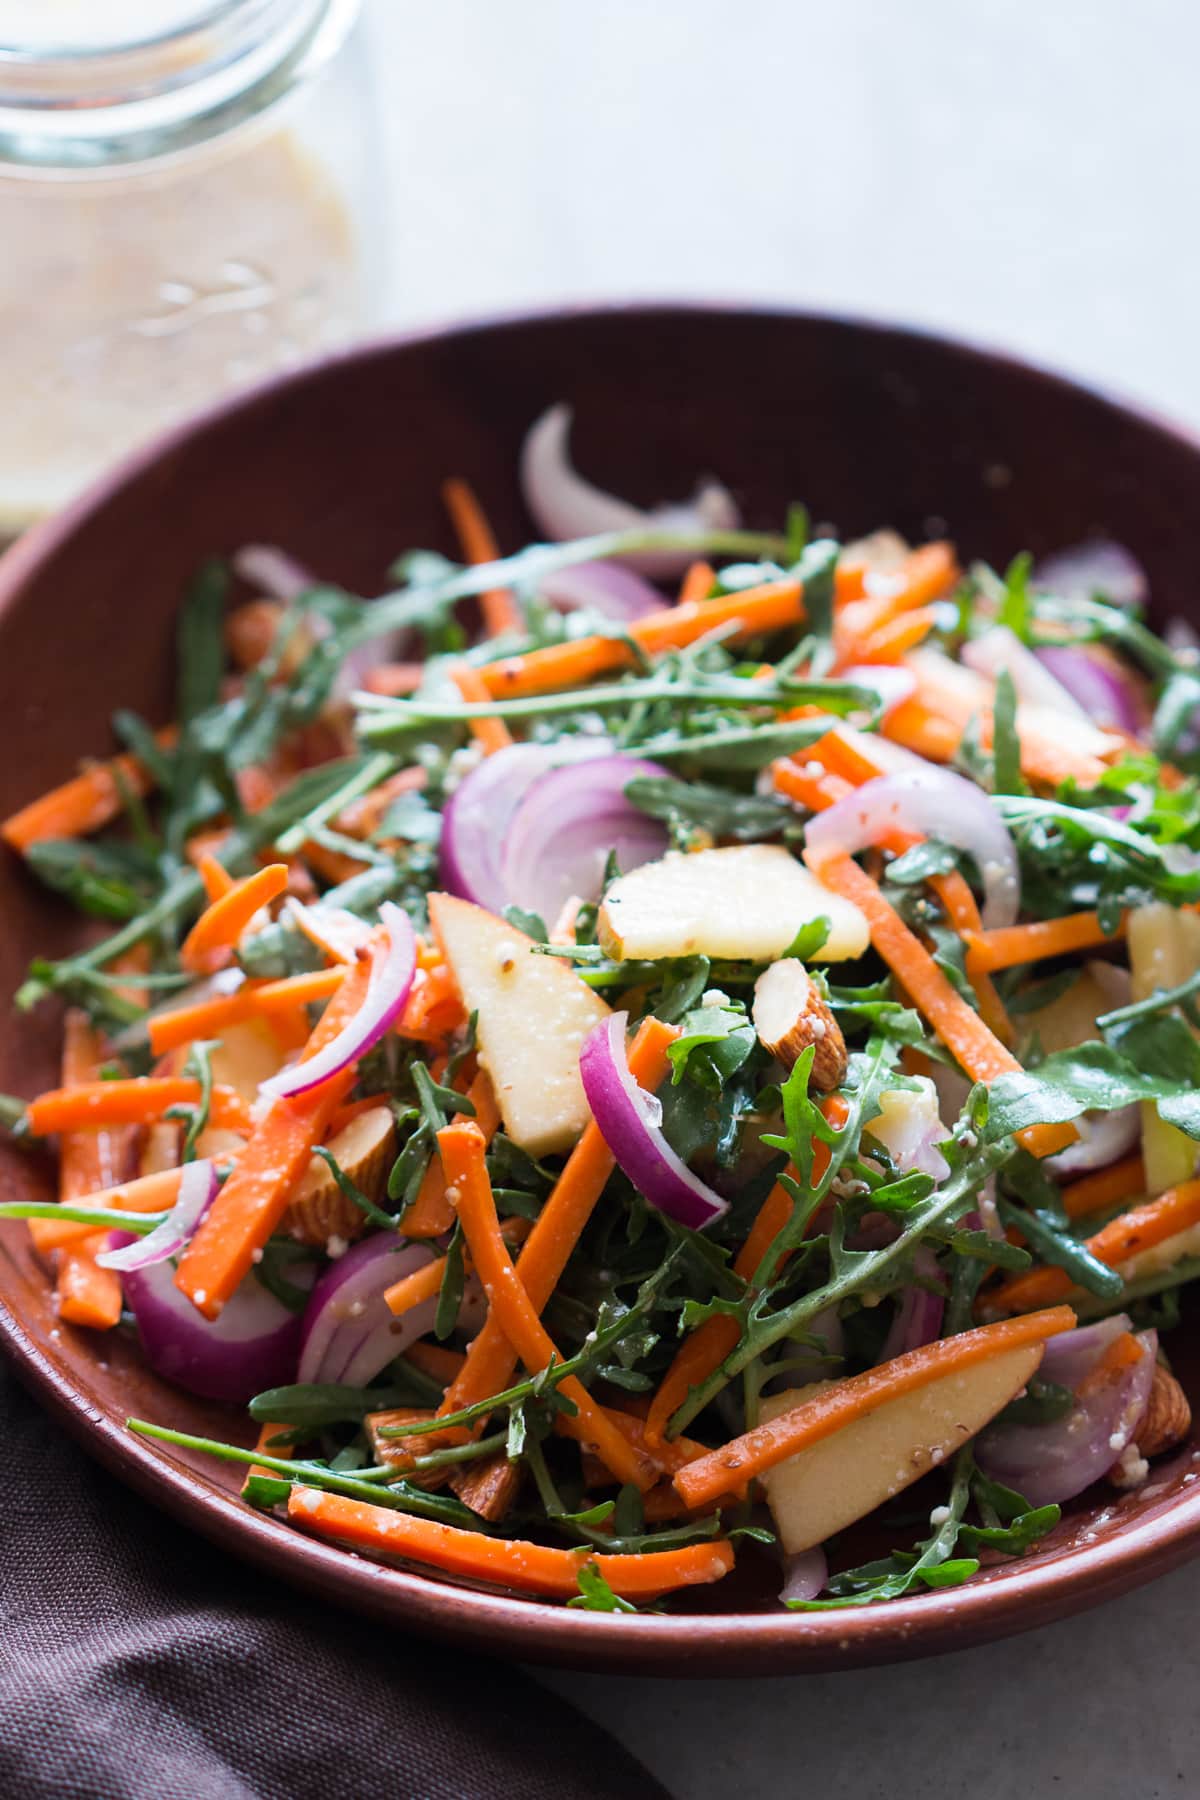 wooden bowl with apple slices, almonds, carrots, arugula, onion, and goat cheese in it all mixed up with creamy dressing